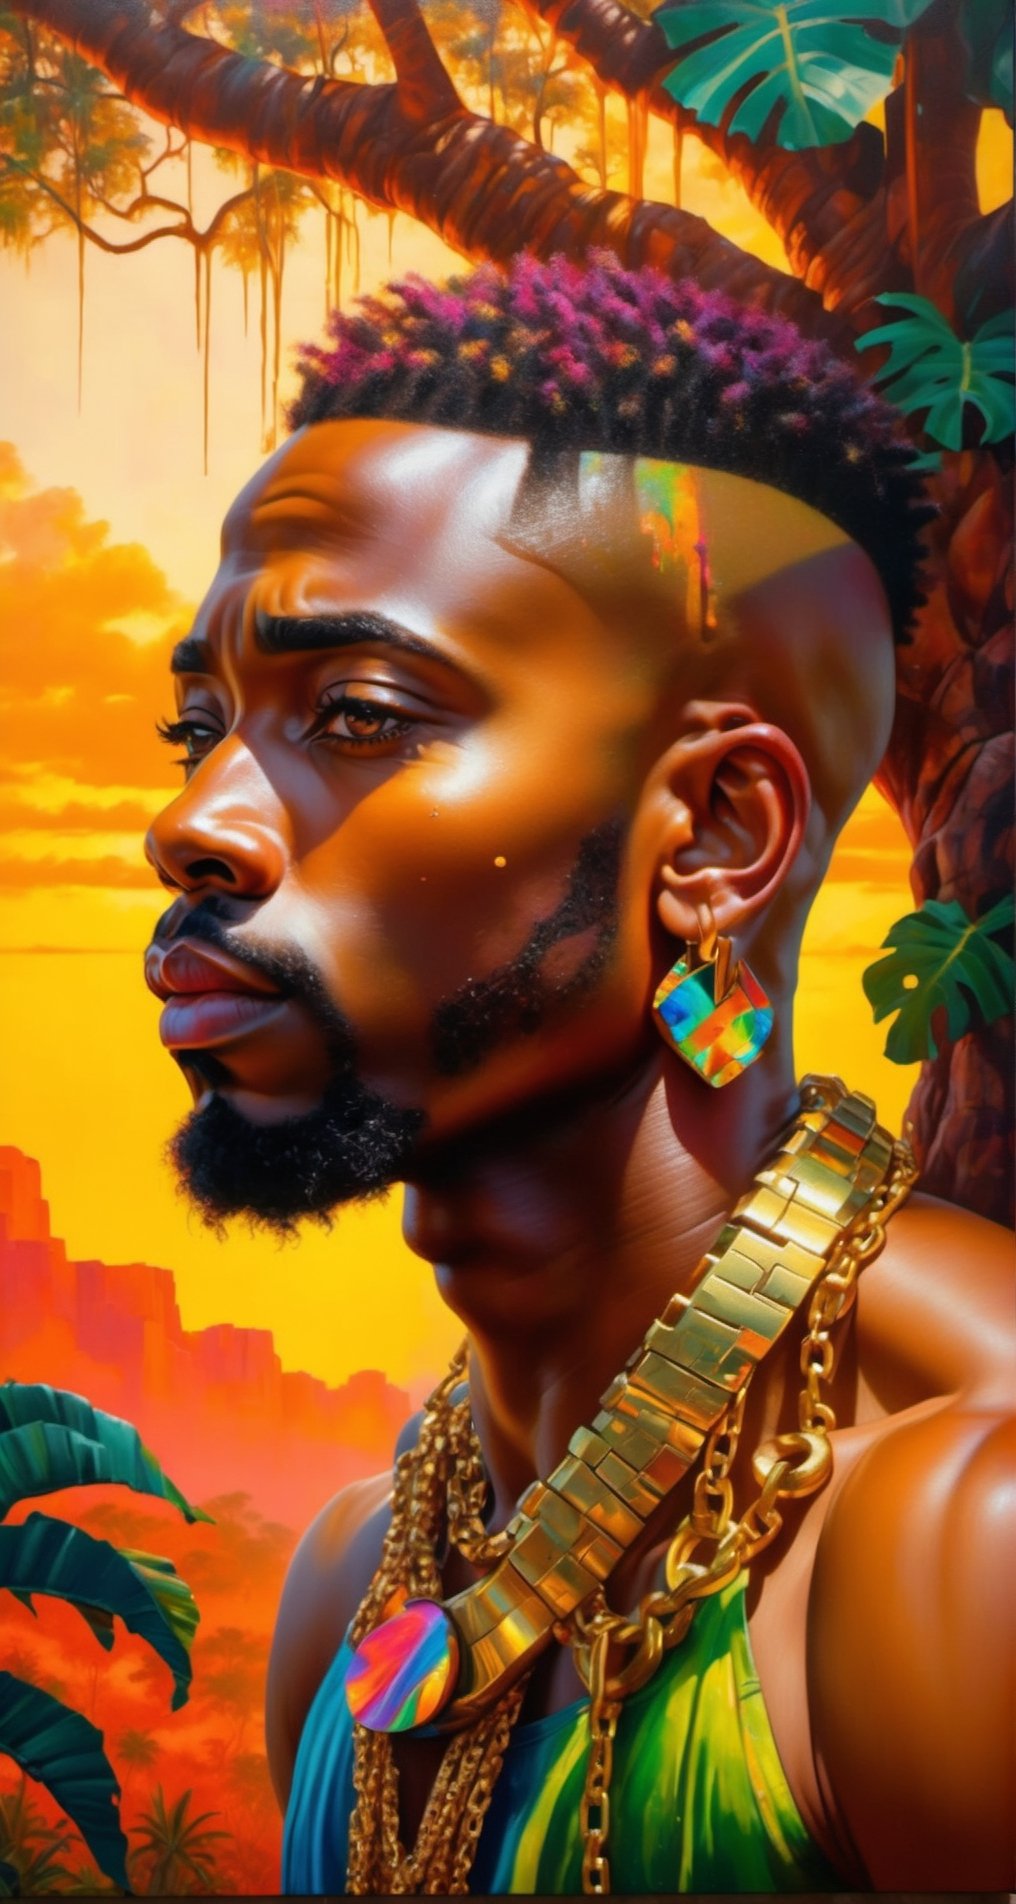 Please create a masterpiece,  (((stunningly beautiful African American man))), perfect face, bald headed, light_brown_eyes, thick lips, epic love, very muscula;r build baobab tree, overlooking the jungle below, hyper-realistic oil painting,  vibrant colors, traditional african mans garment, gold chains and bracelets,   biopunk,   dystopic,  golden light,  perfect composition, colorful sky, dripping paint,  